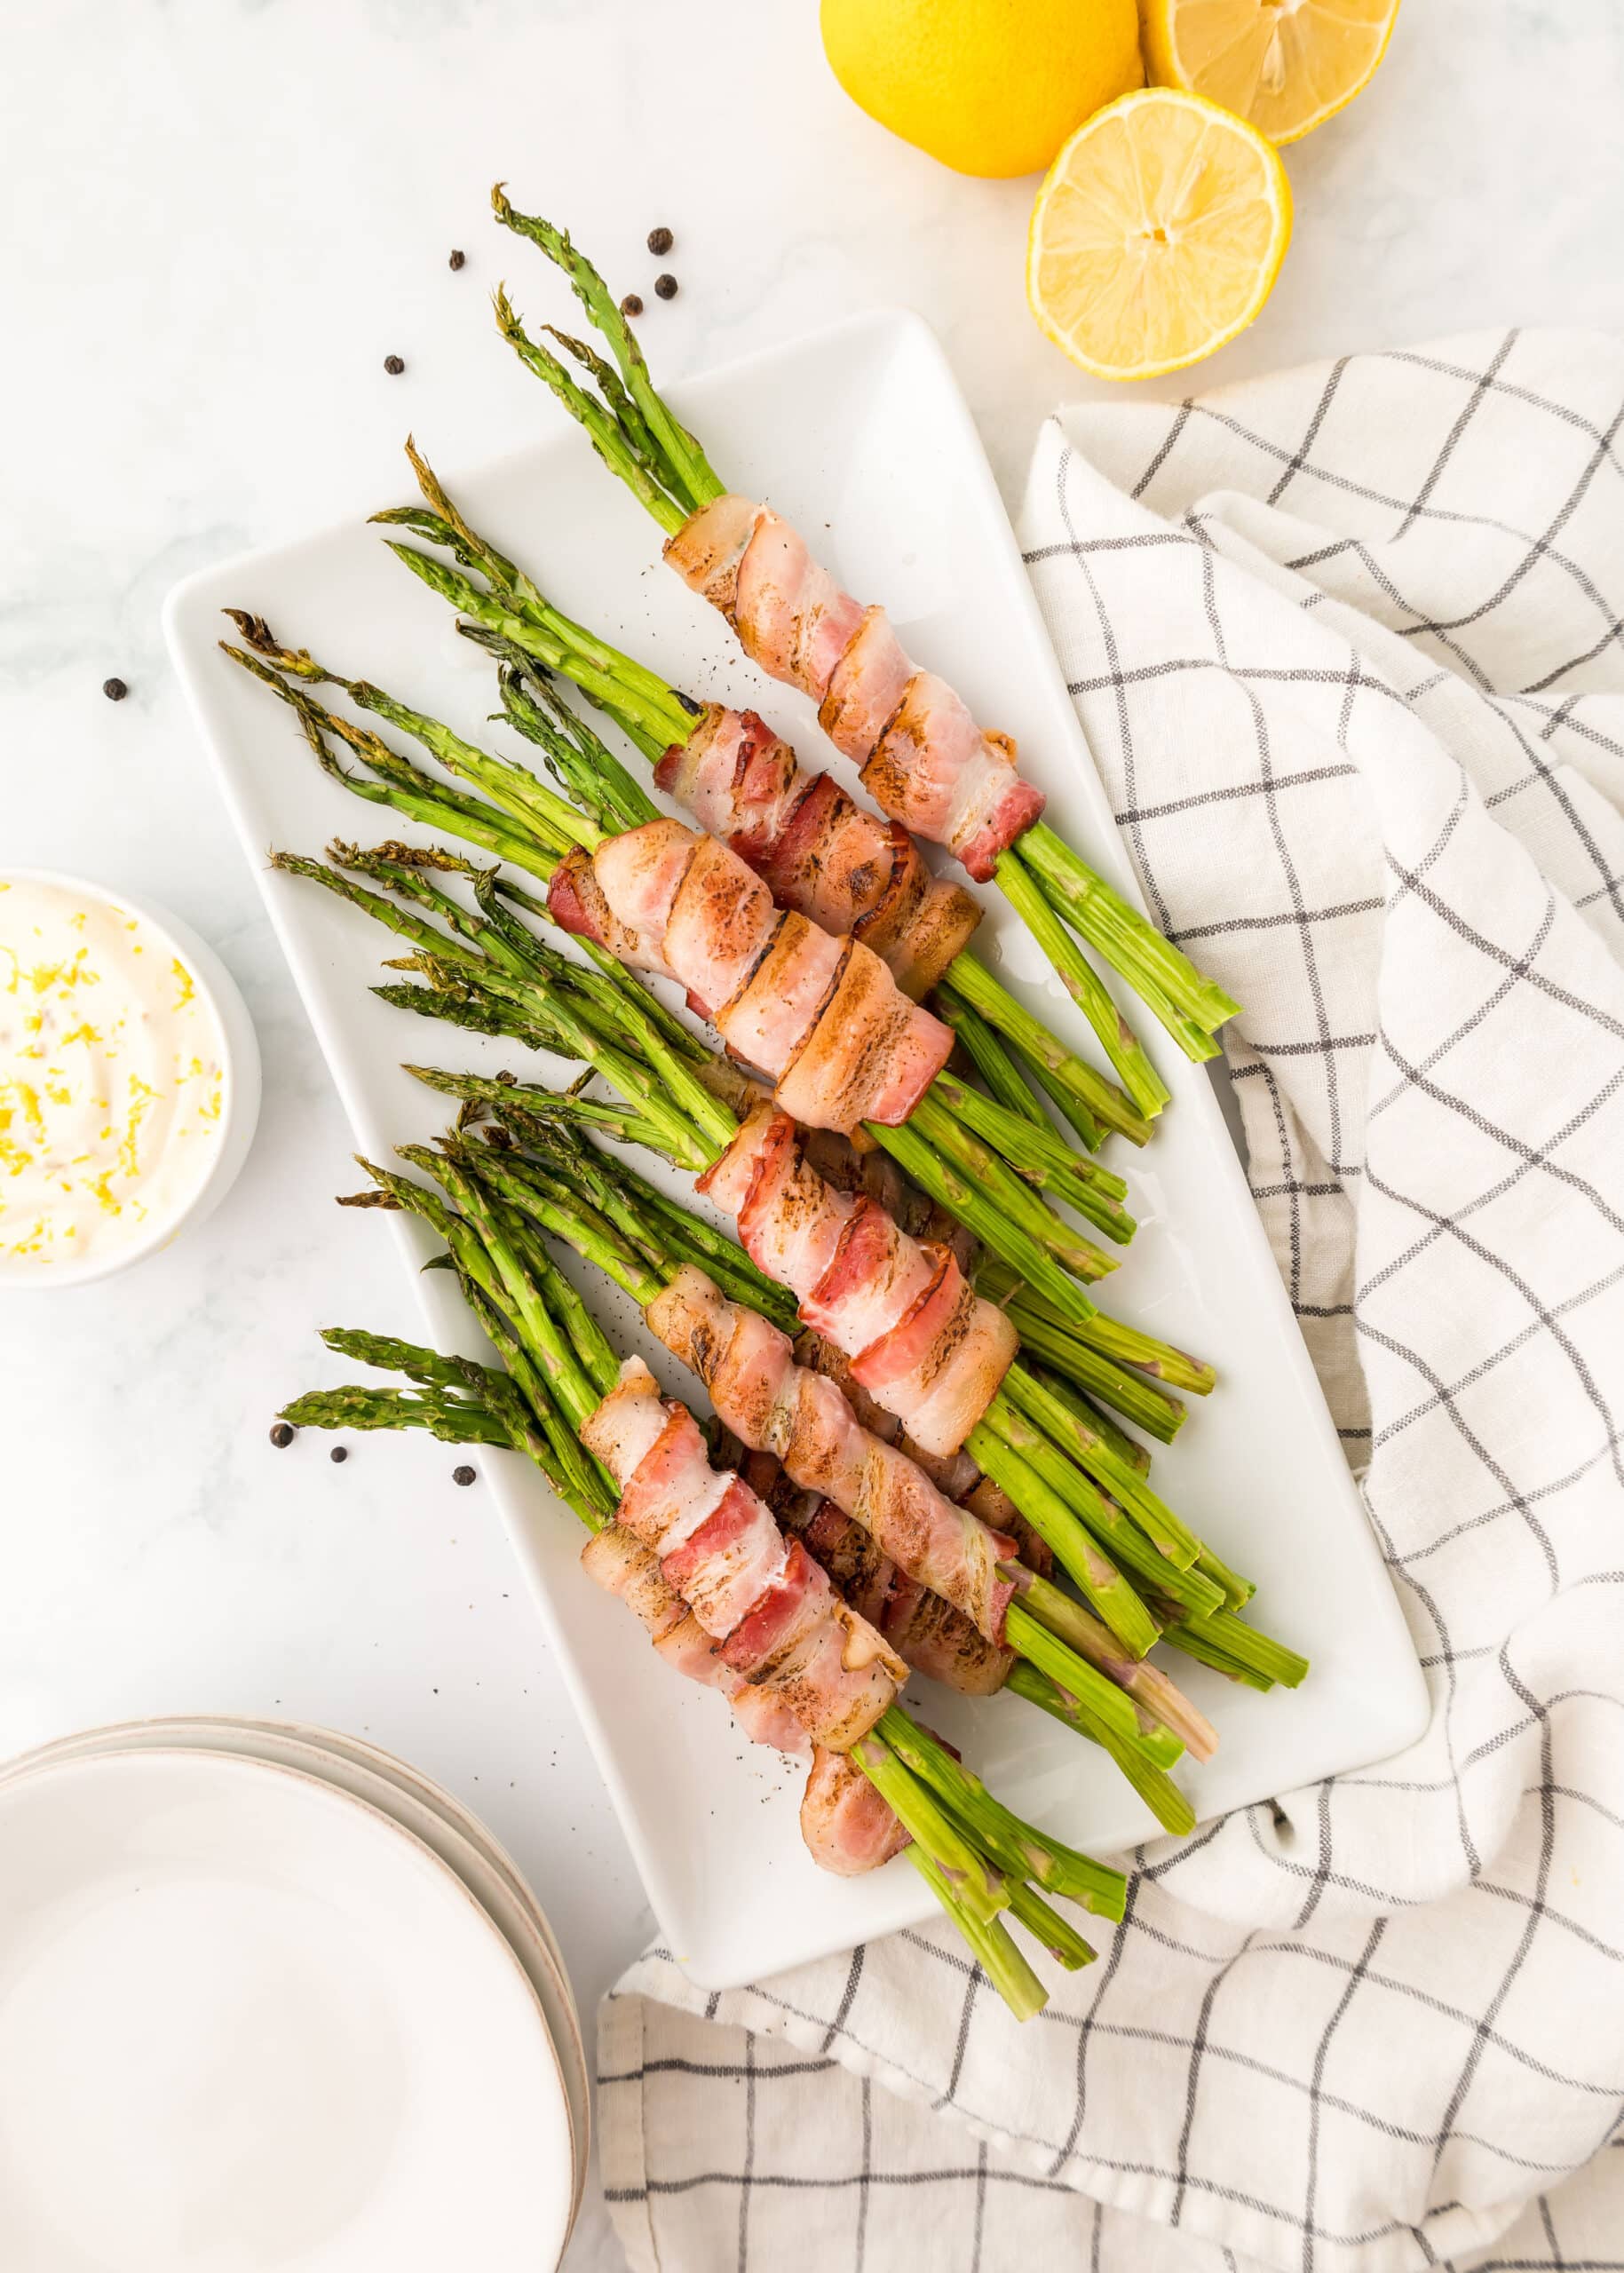 Grilled Bacon-Wrapped Asparagus with Lemon Aioli (Keto-Friendly)